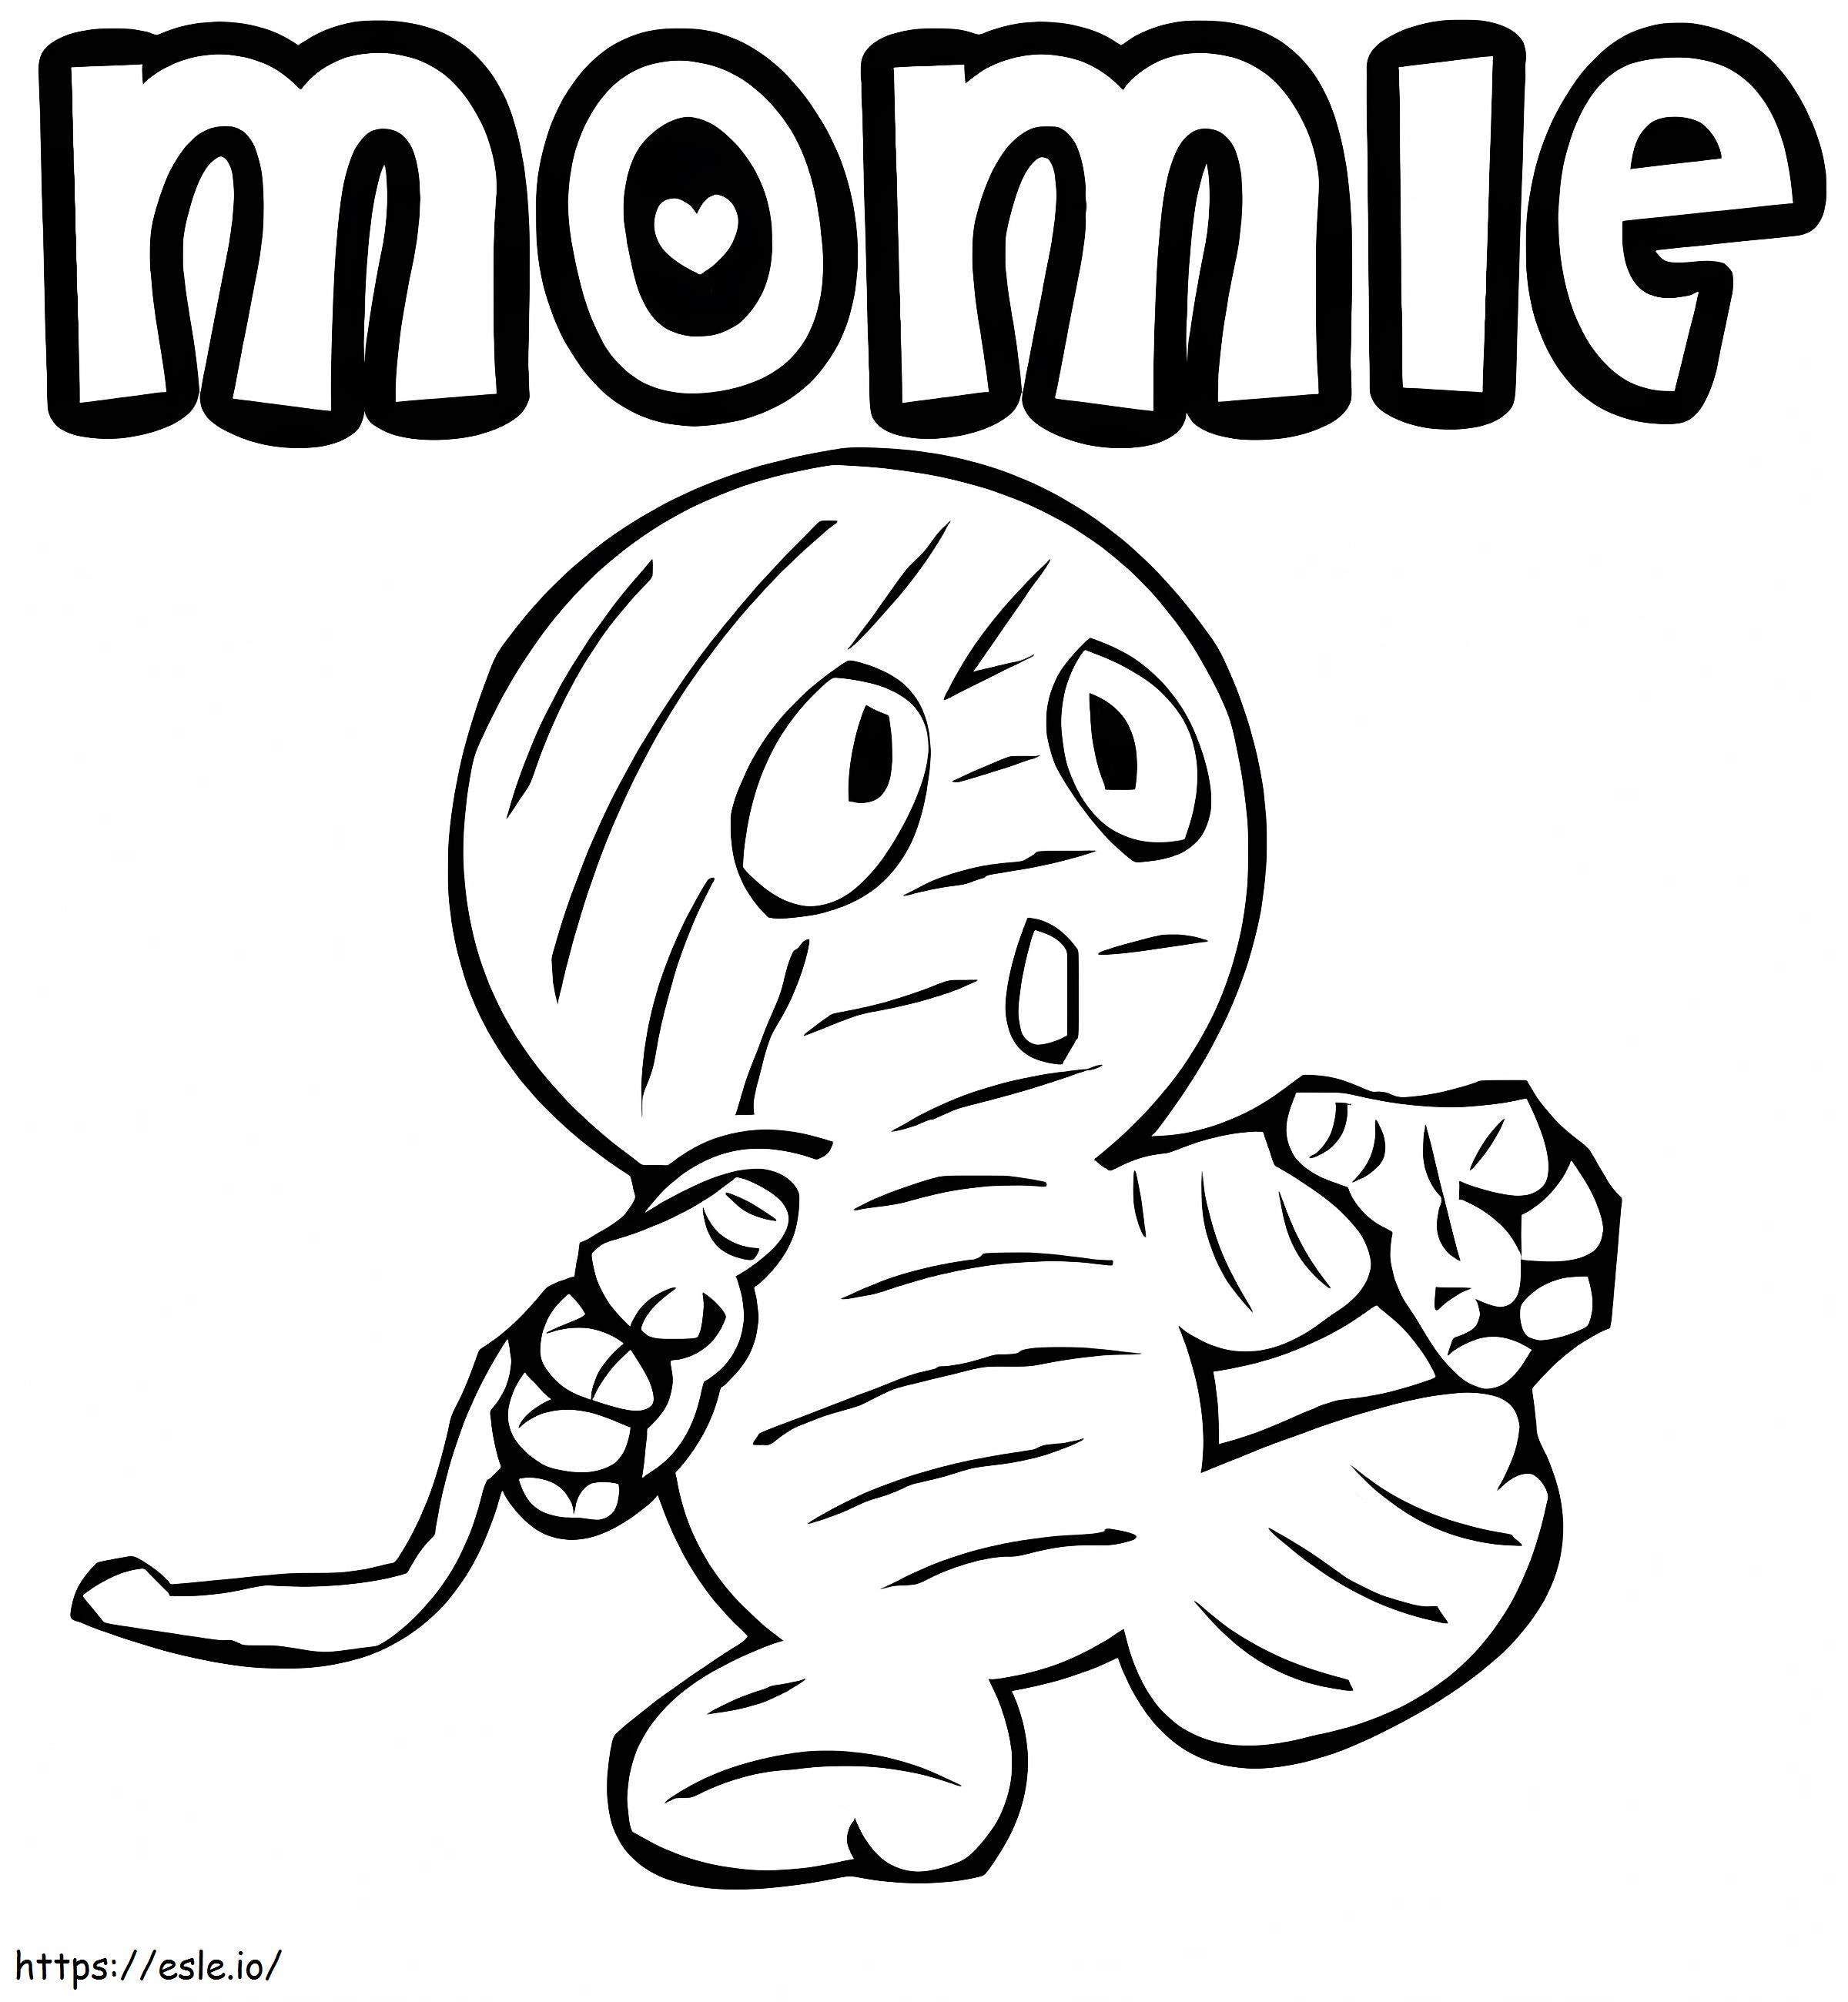 Momie Dhalloween coloring page